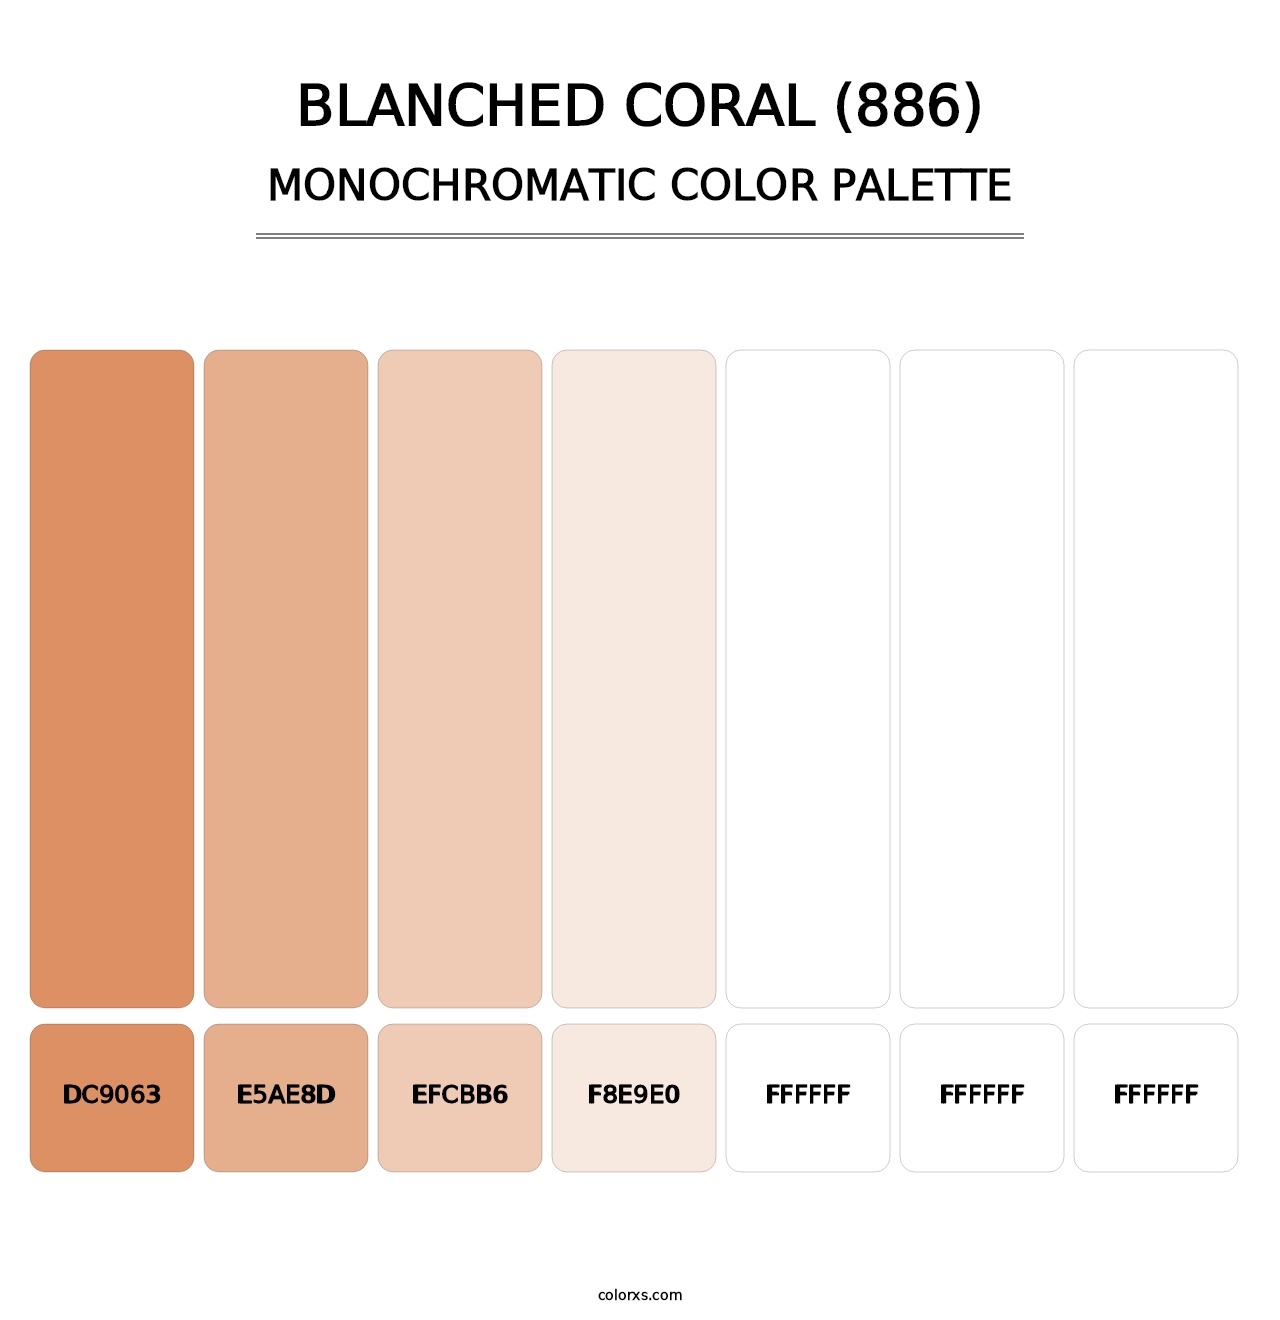 Blanched Coral (886) - Monochromatic Color Palette